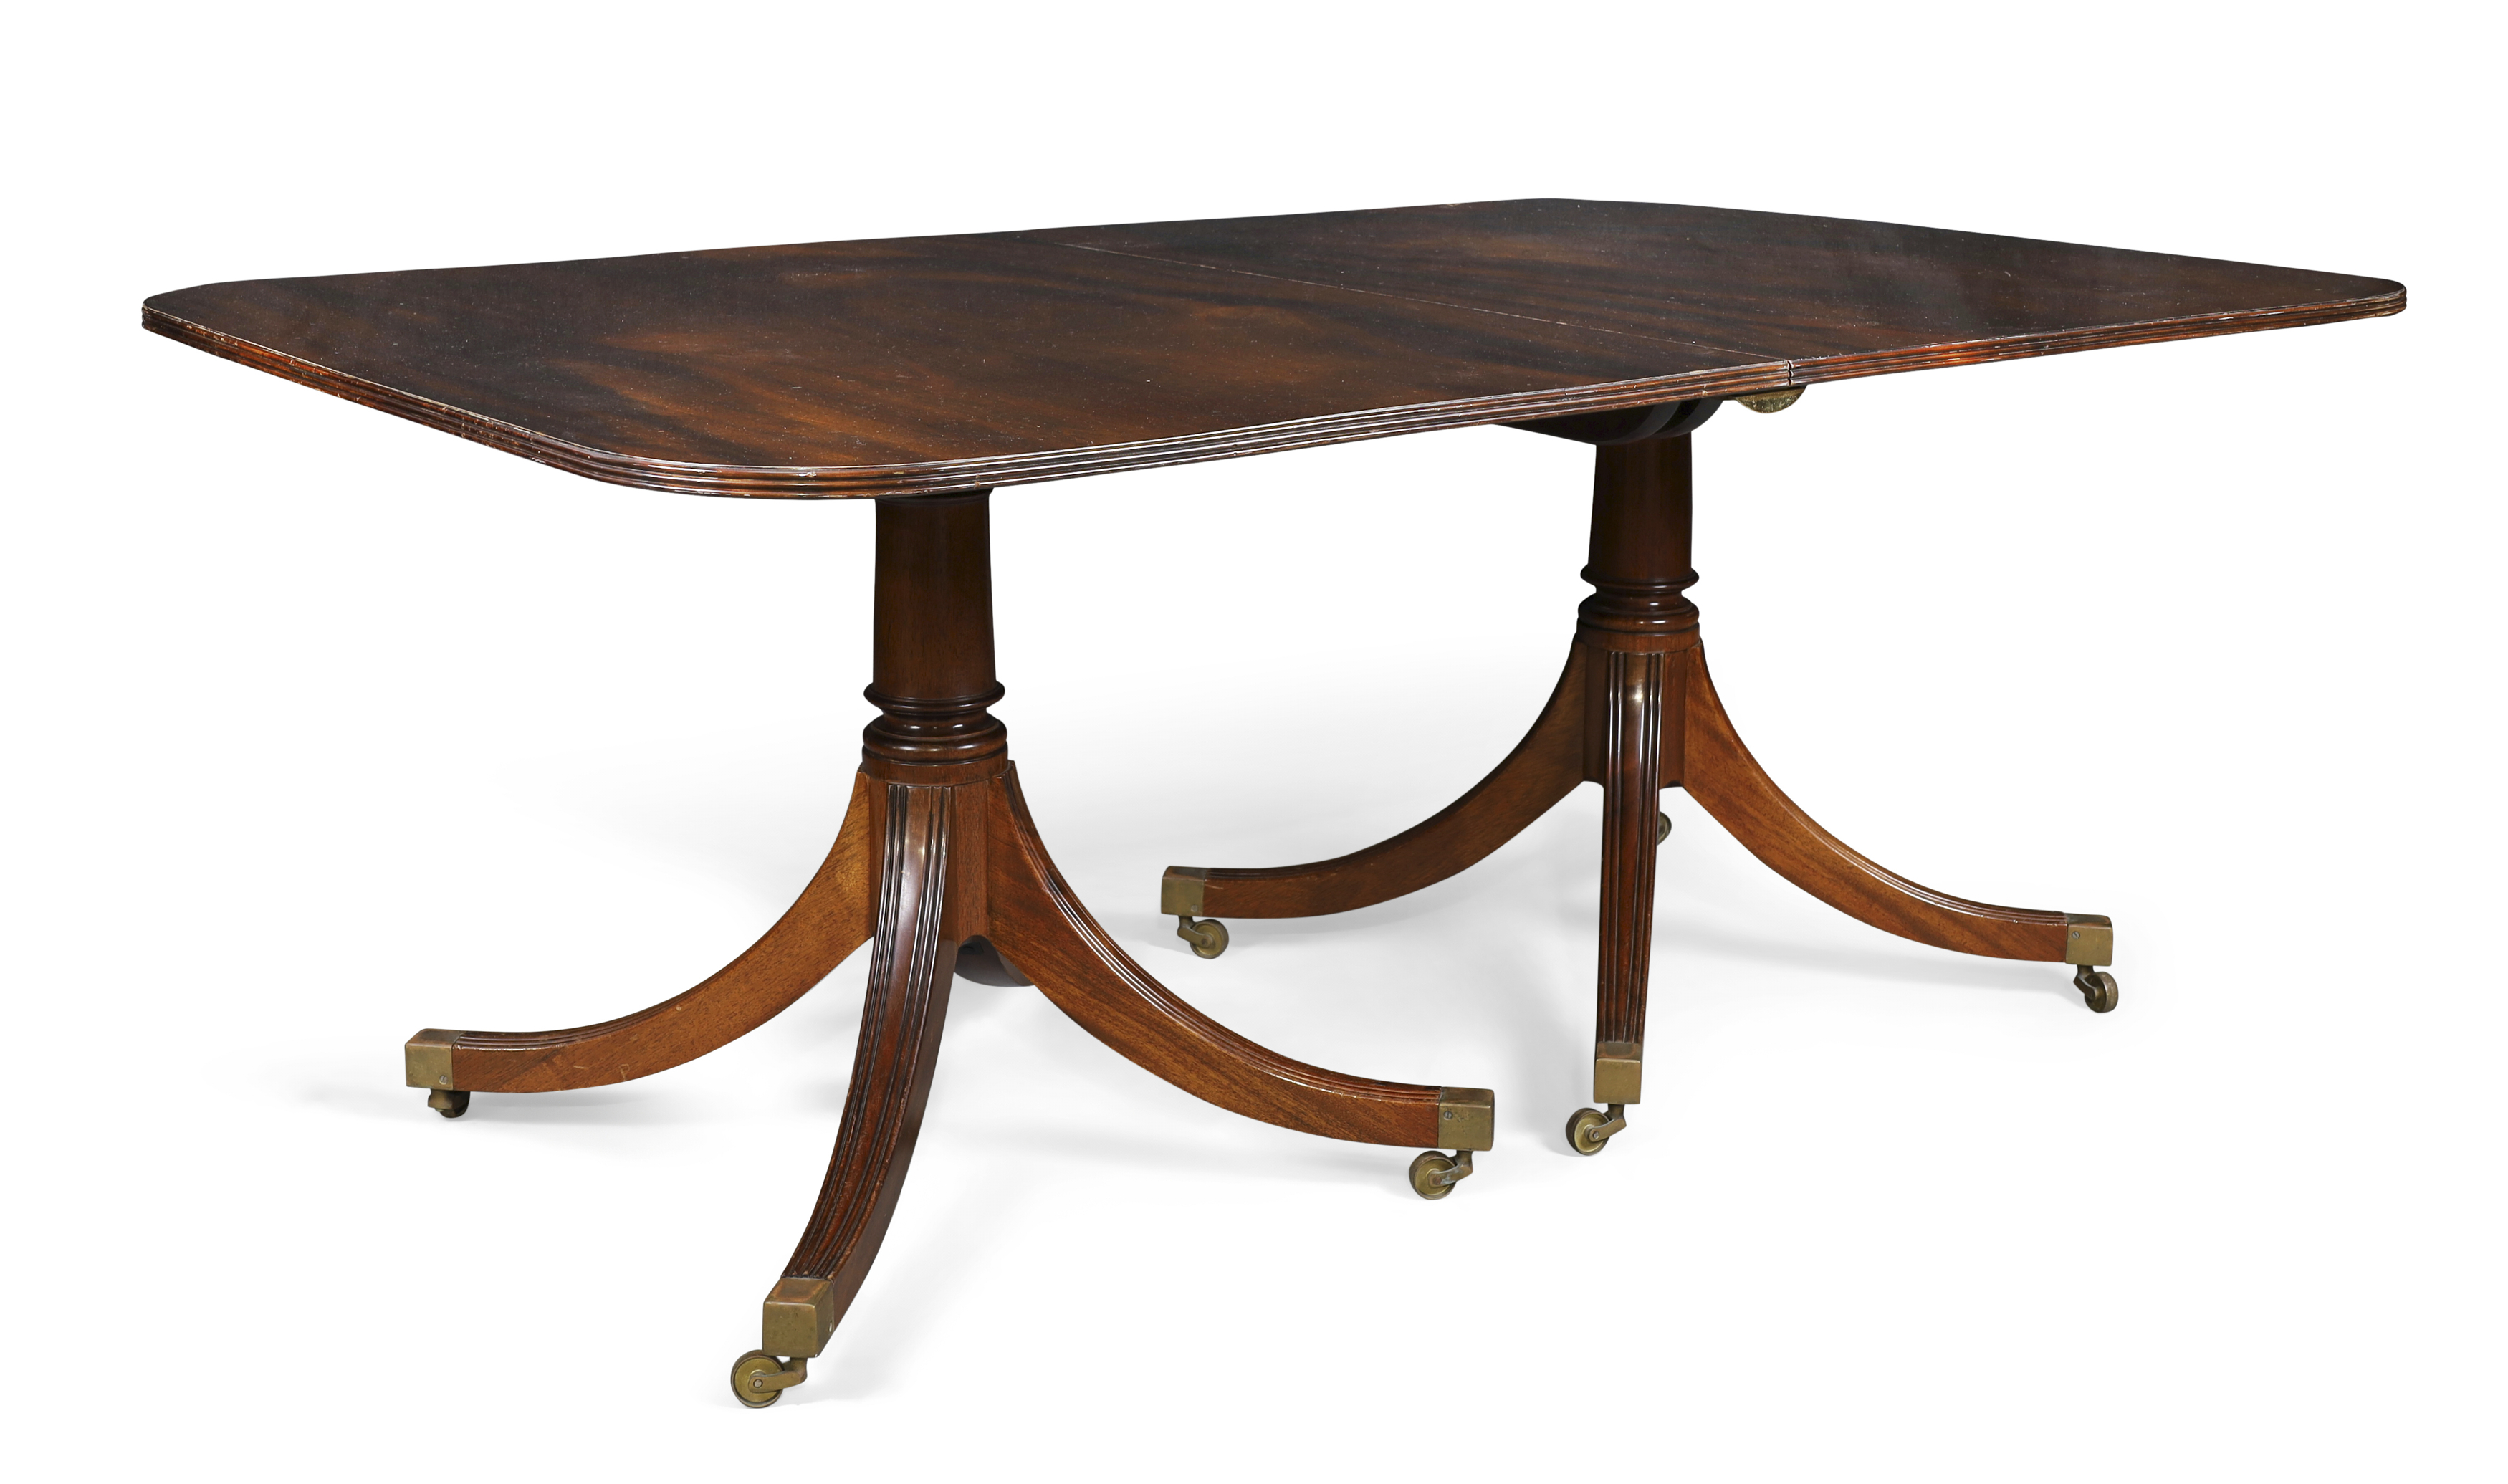 An English mahogany twin pedestal dining table by William Tillman, George III style, 20th century...